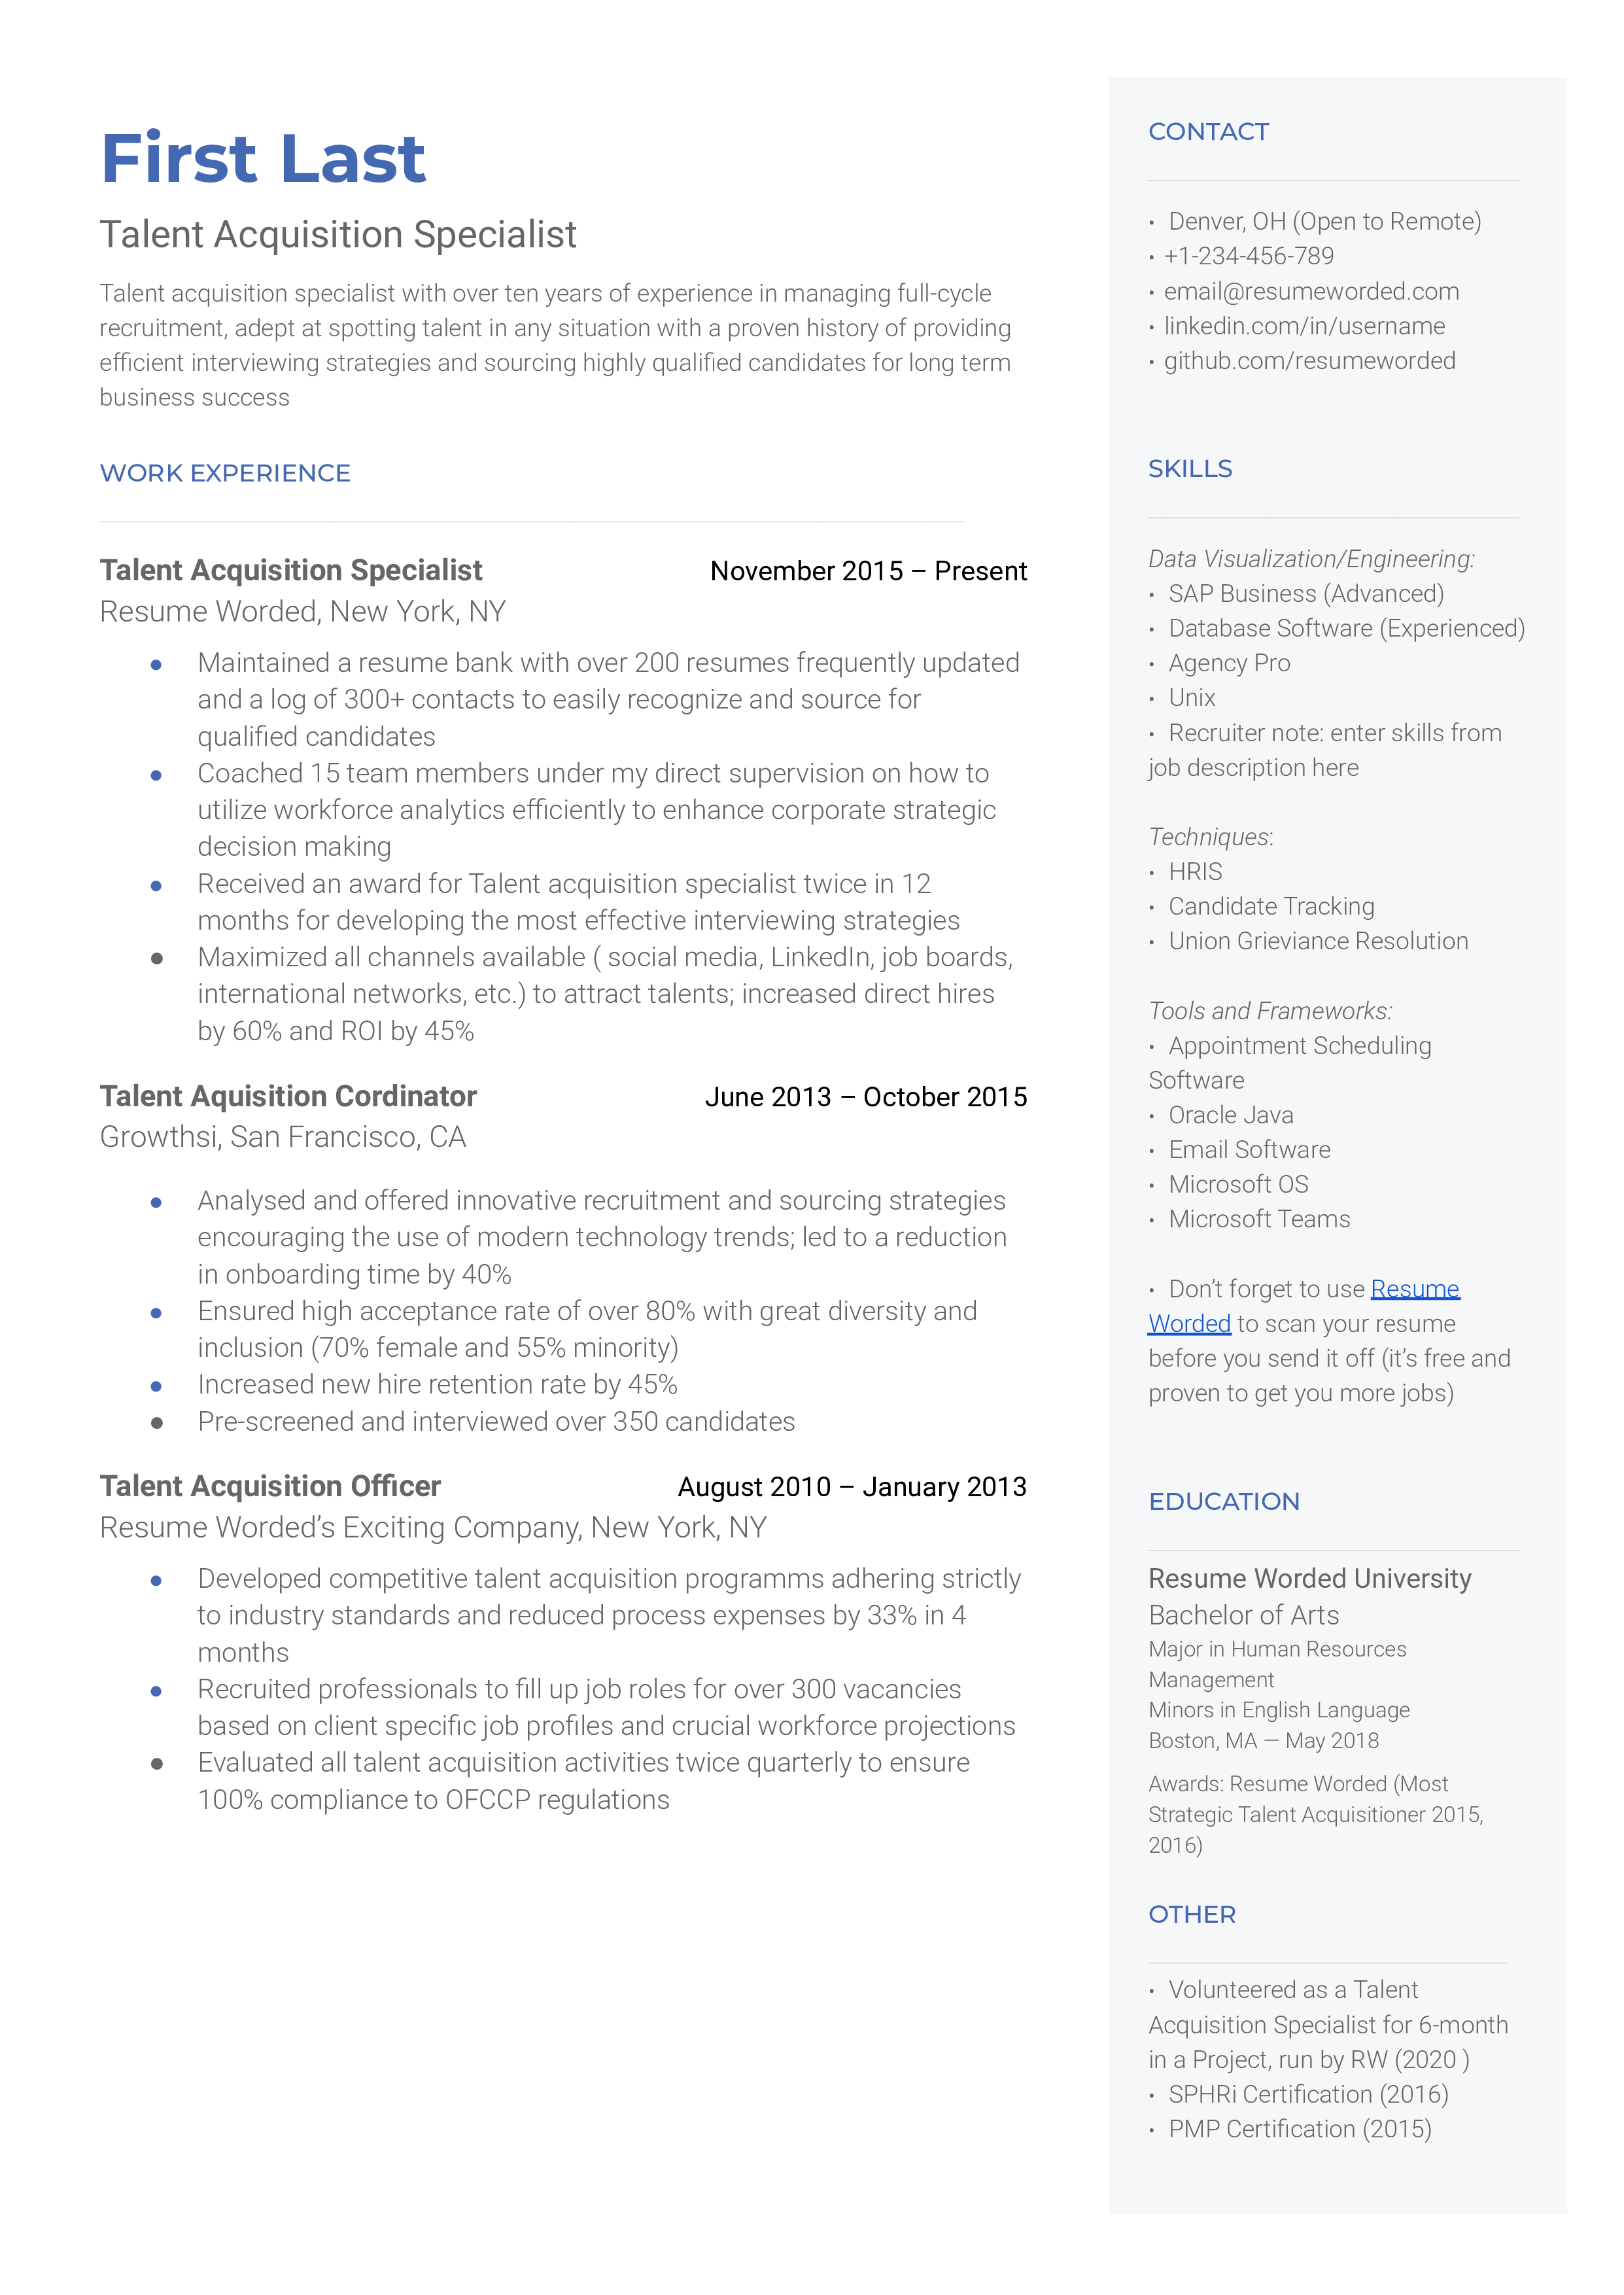 Talent Acquisition Specialist Resume Template + Example